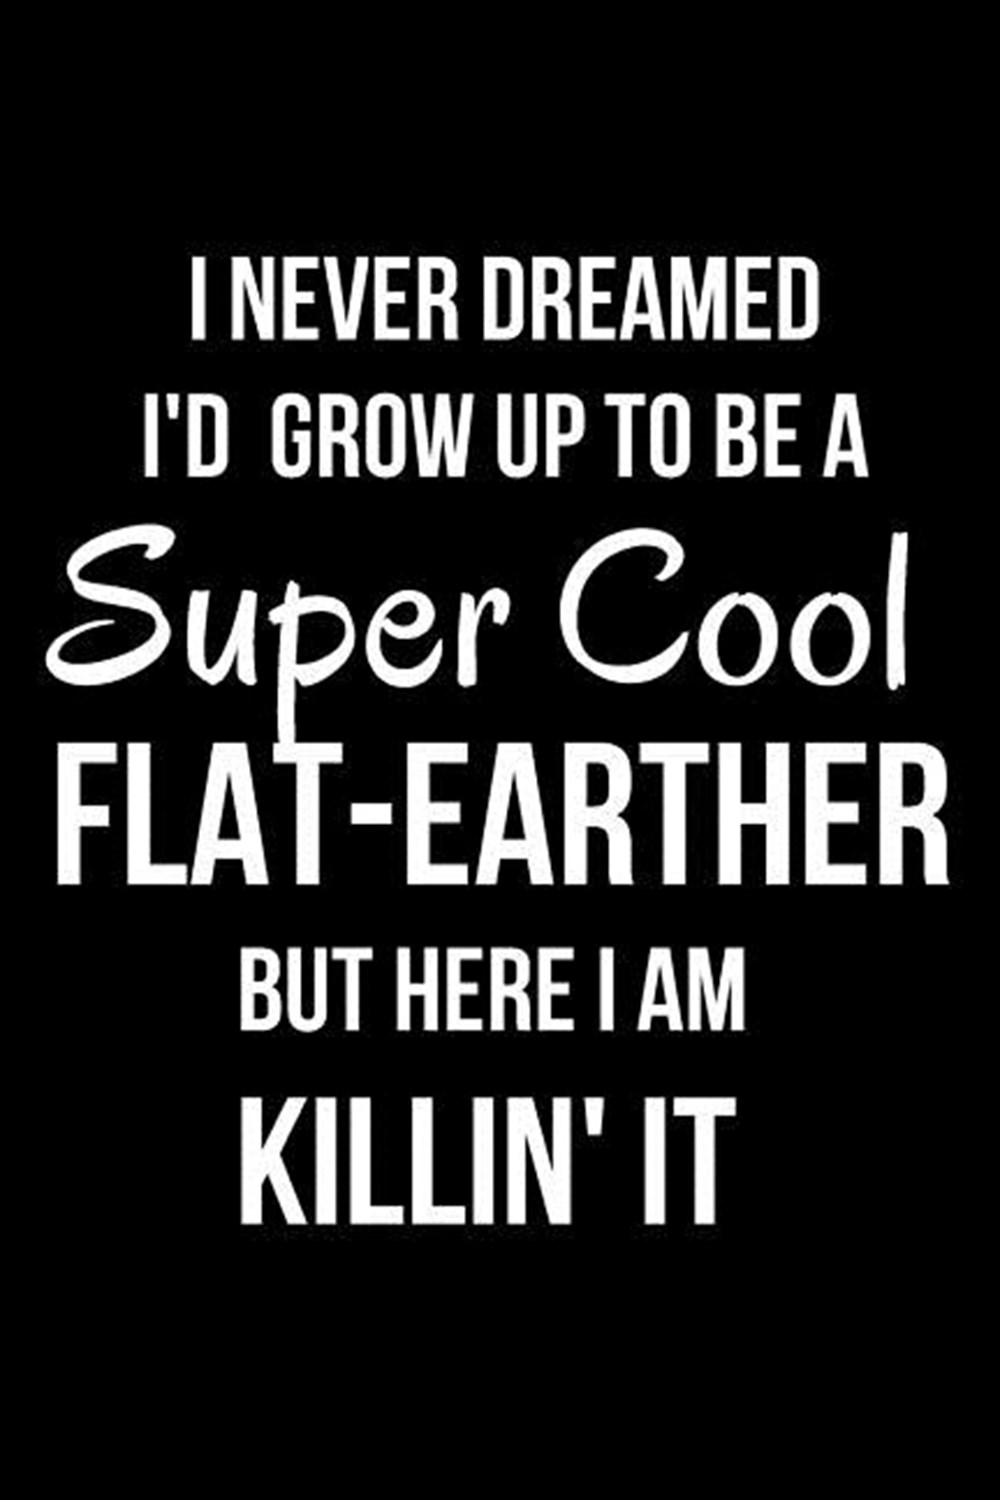 I Never Dreamed I'd Grow Up to Be a Super Cool Flat-Earther But Here I Am Killin' It Blank Line Jour